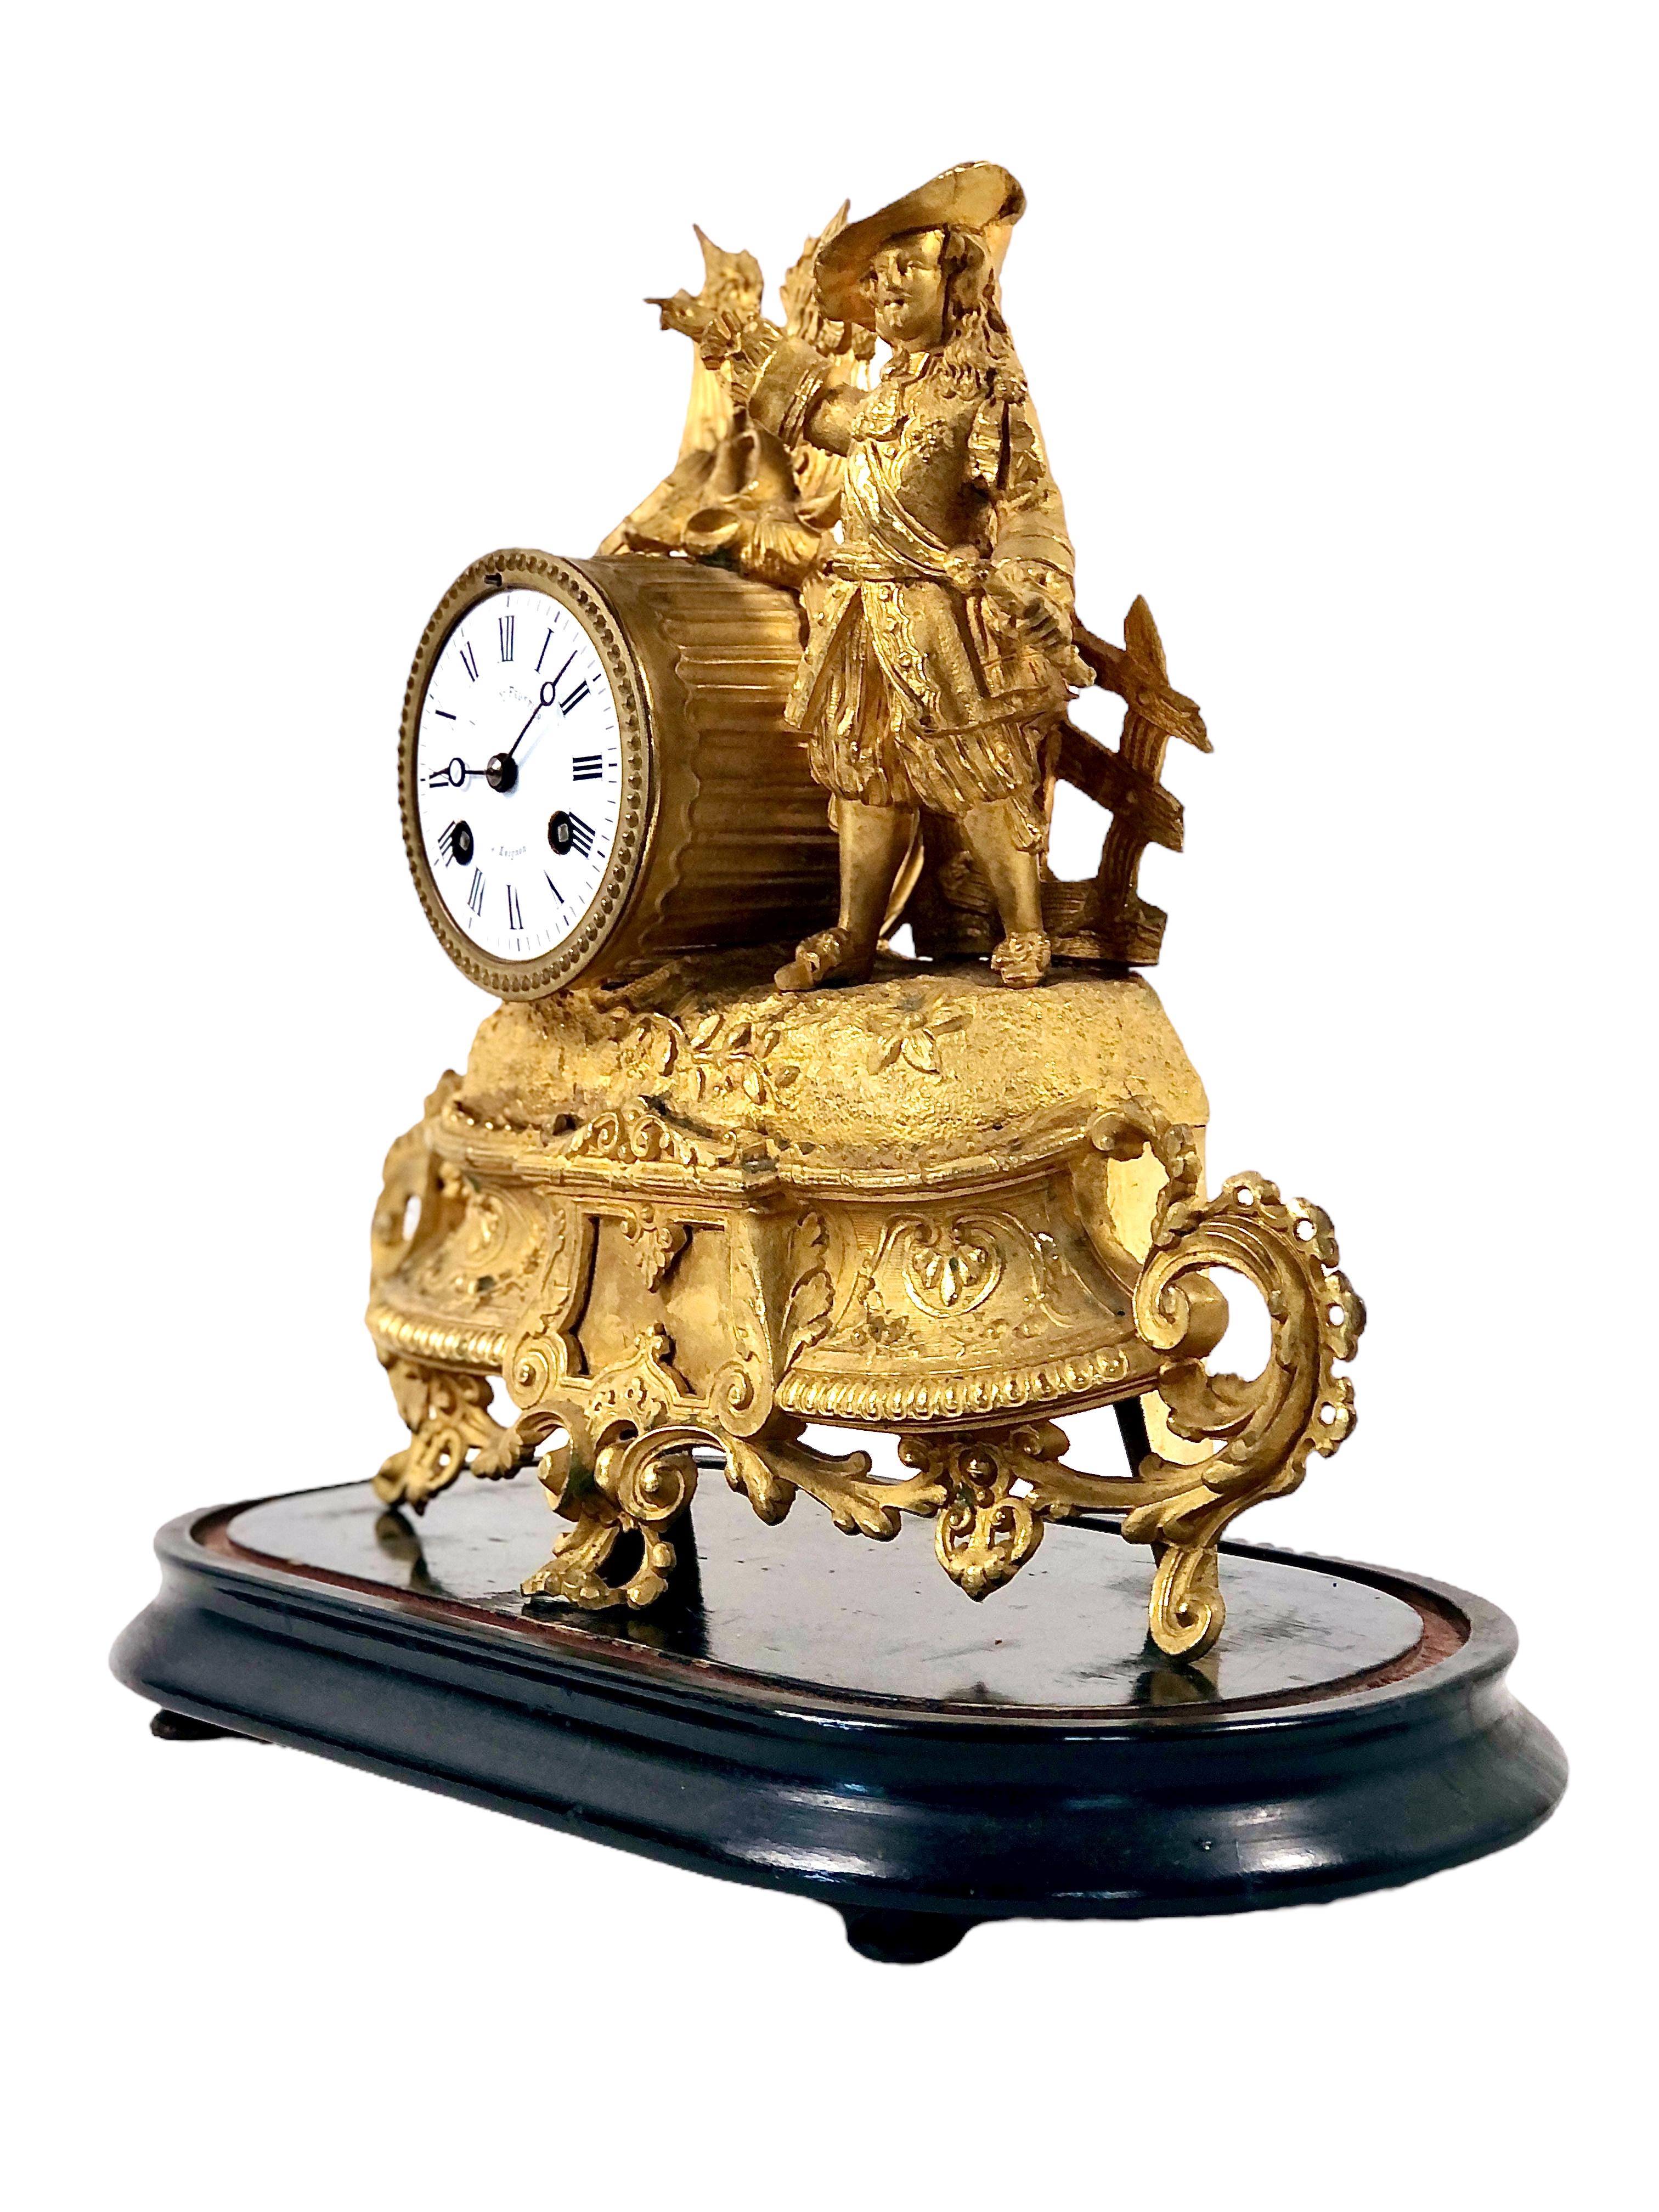 19th Century 19th century French Gilt Mantel Clock under Glass Dome